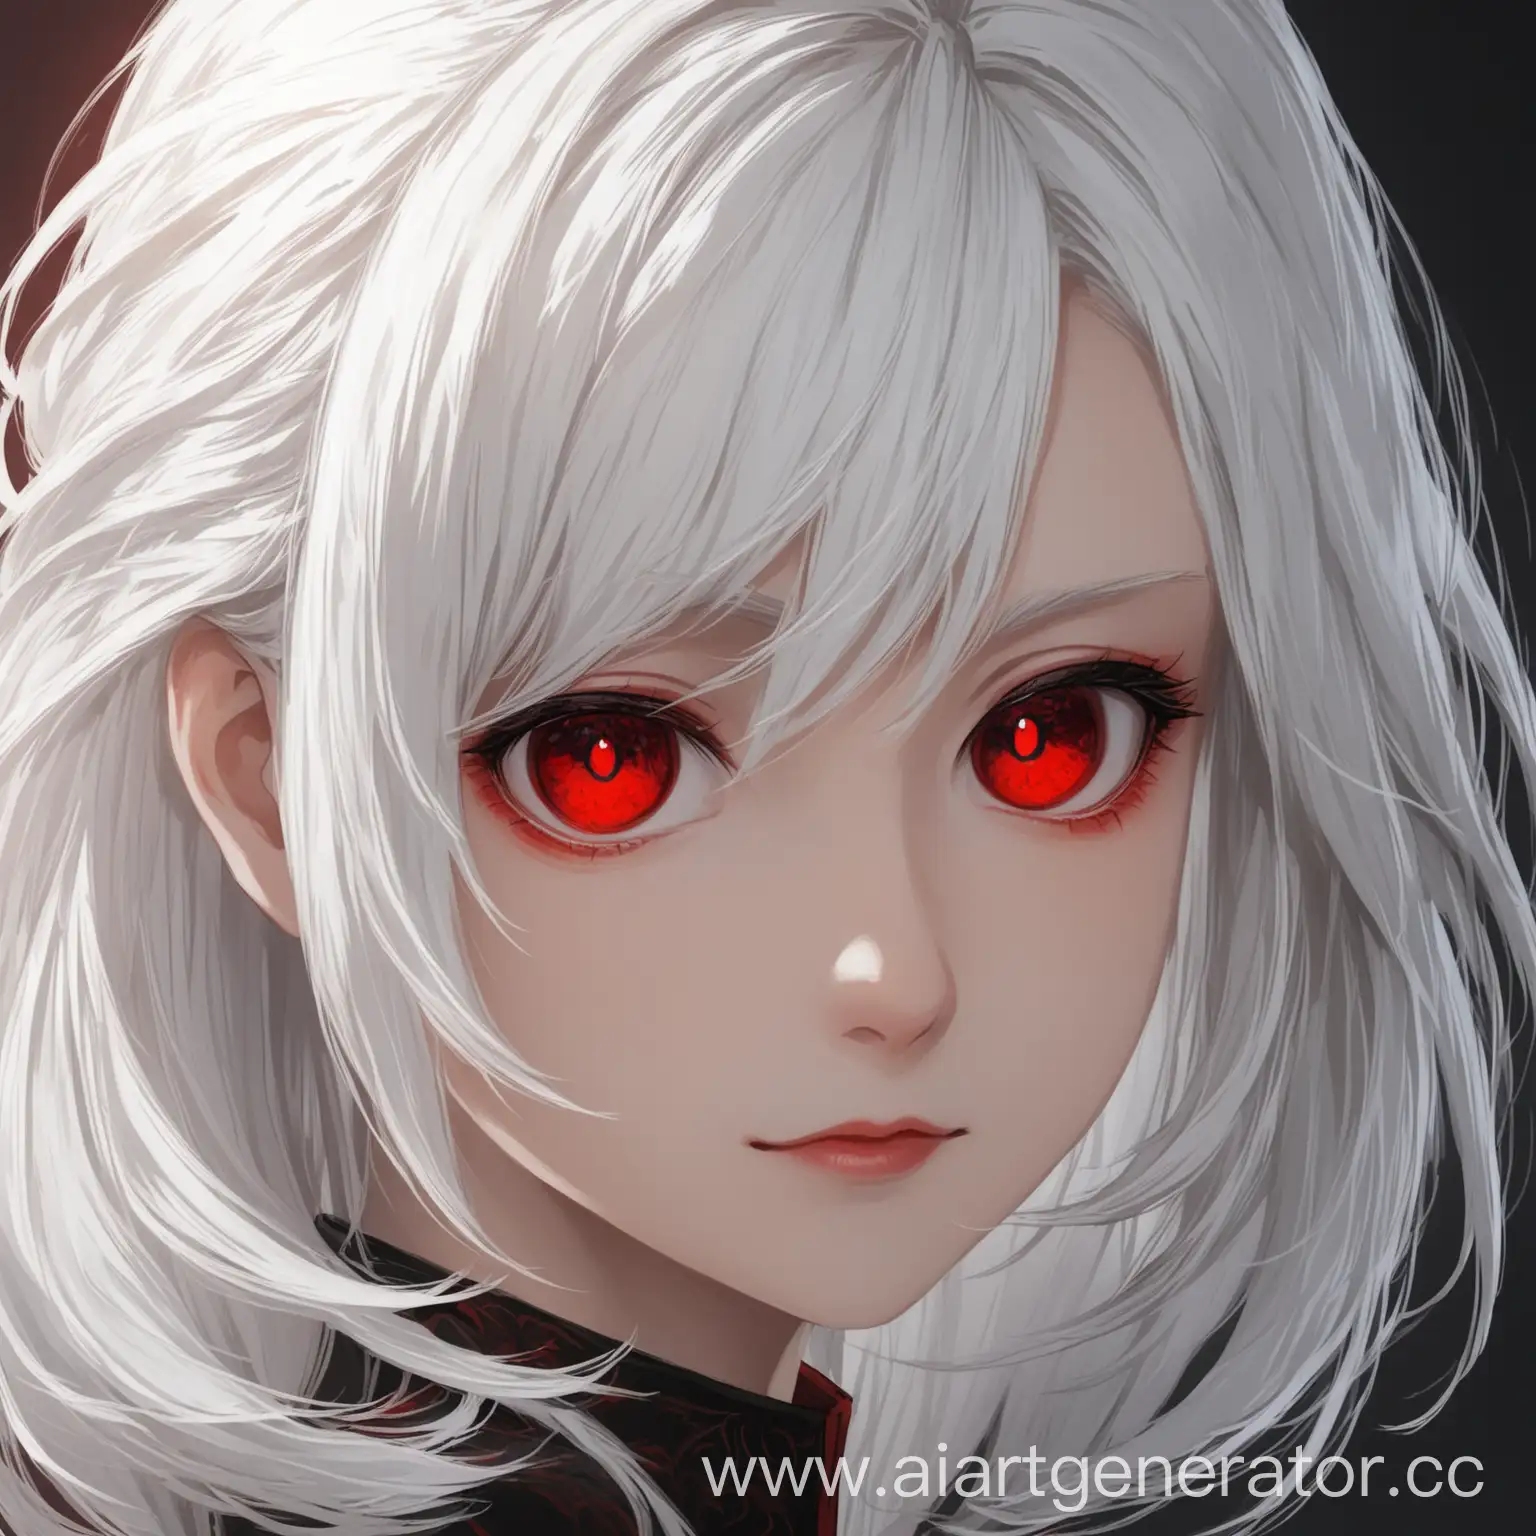 Ethereal-Girl-with-White-Hair-and-Red-Eyes-Portrait